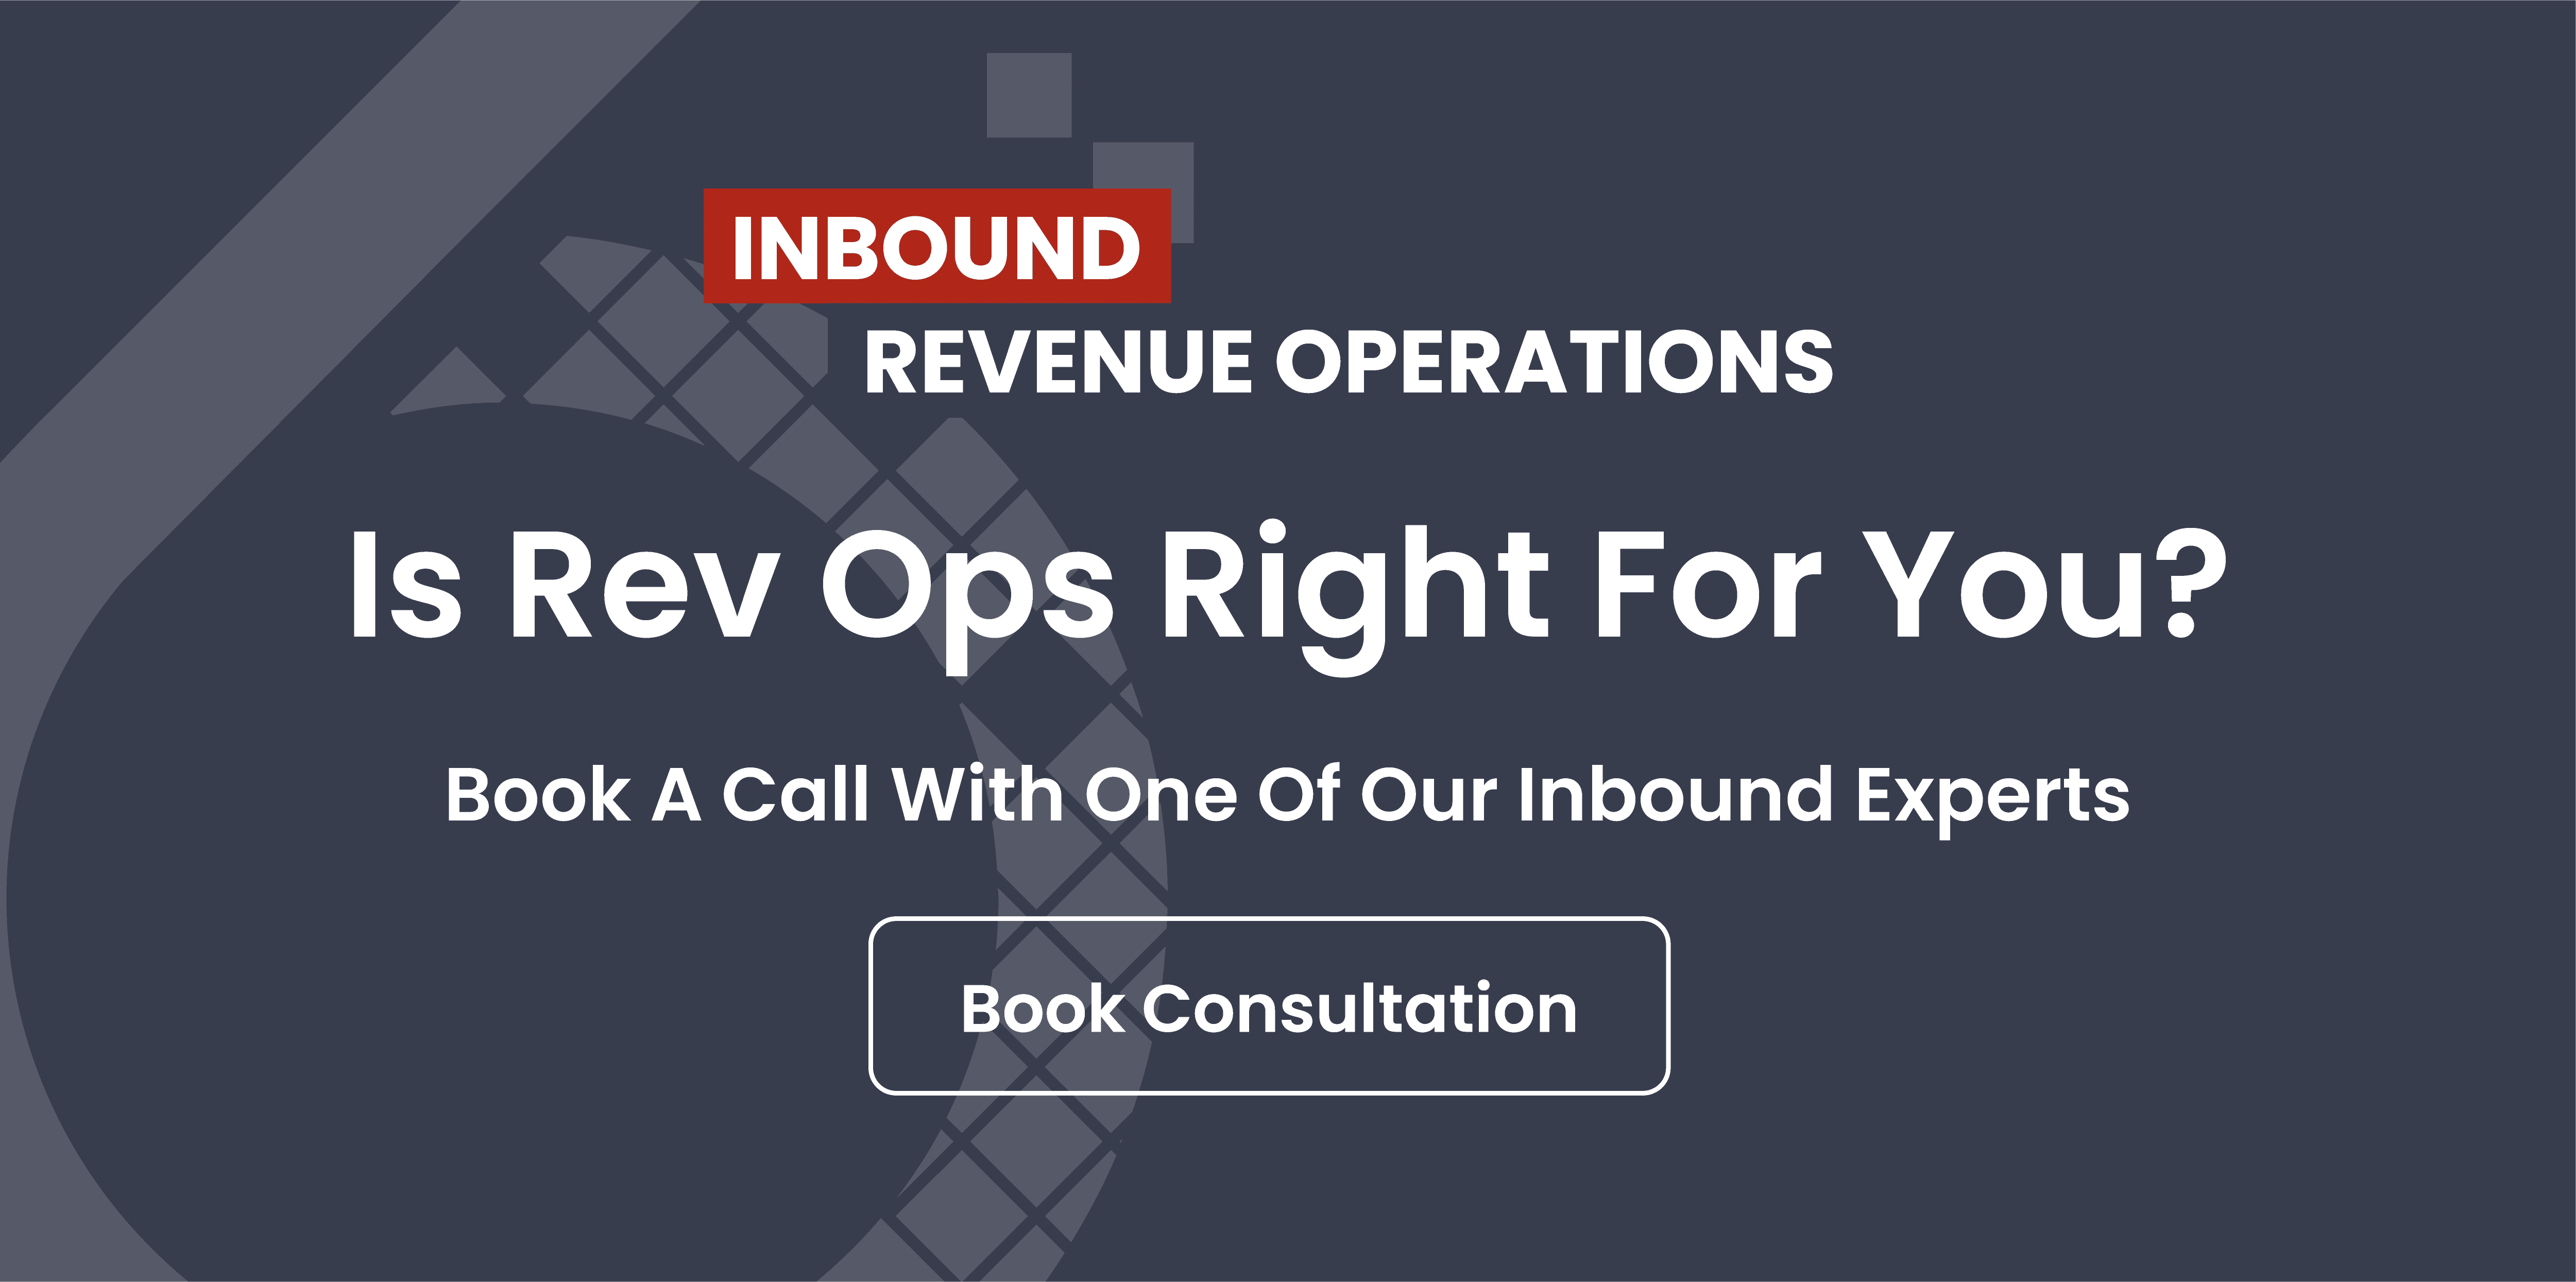 6t30 - Book A Consultation_Rev Ops